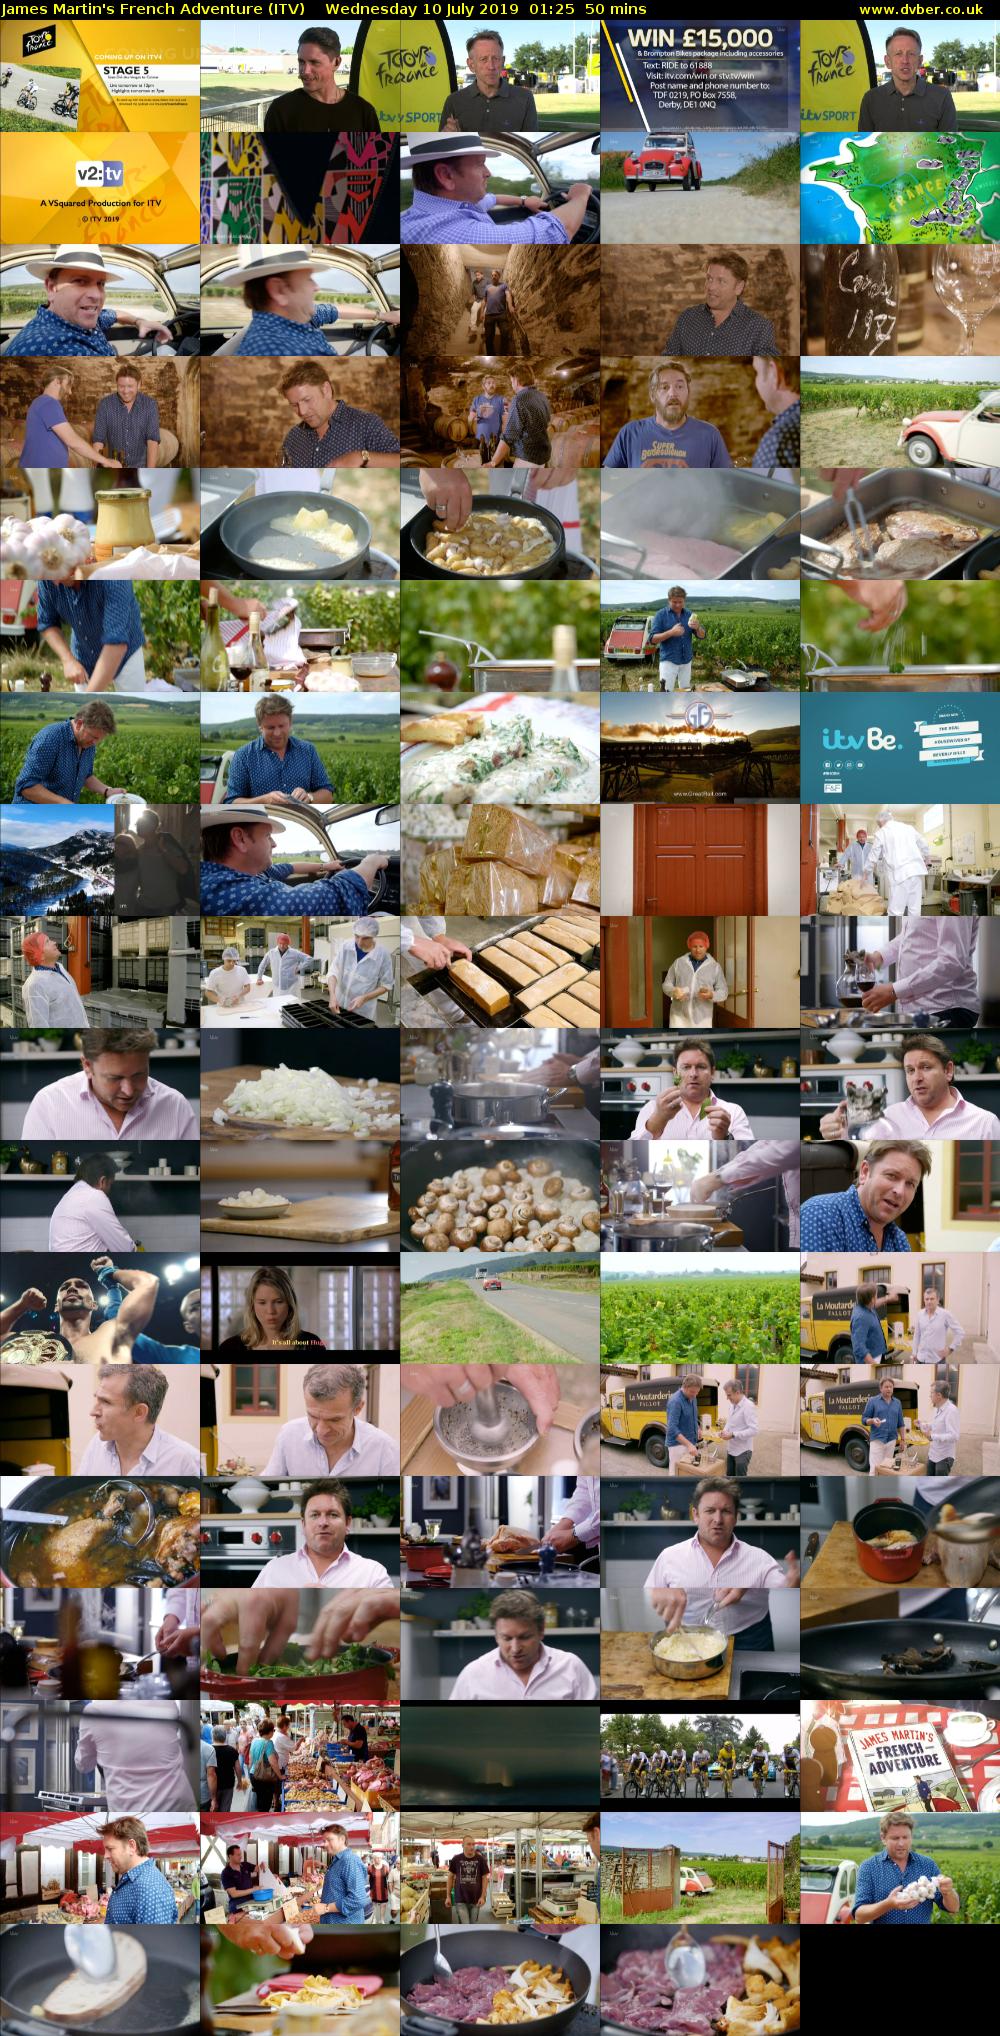 James Martin's French Adventure (ITV) Wednesday 10 July 2019 01:25 - 02:15